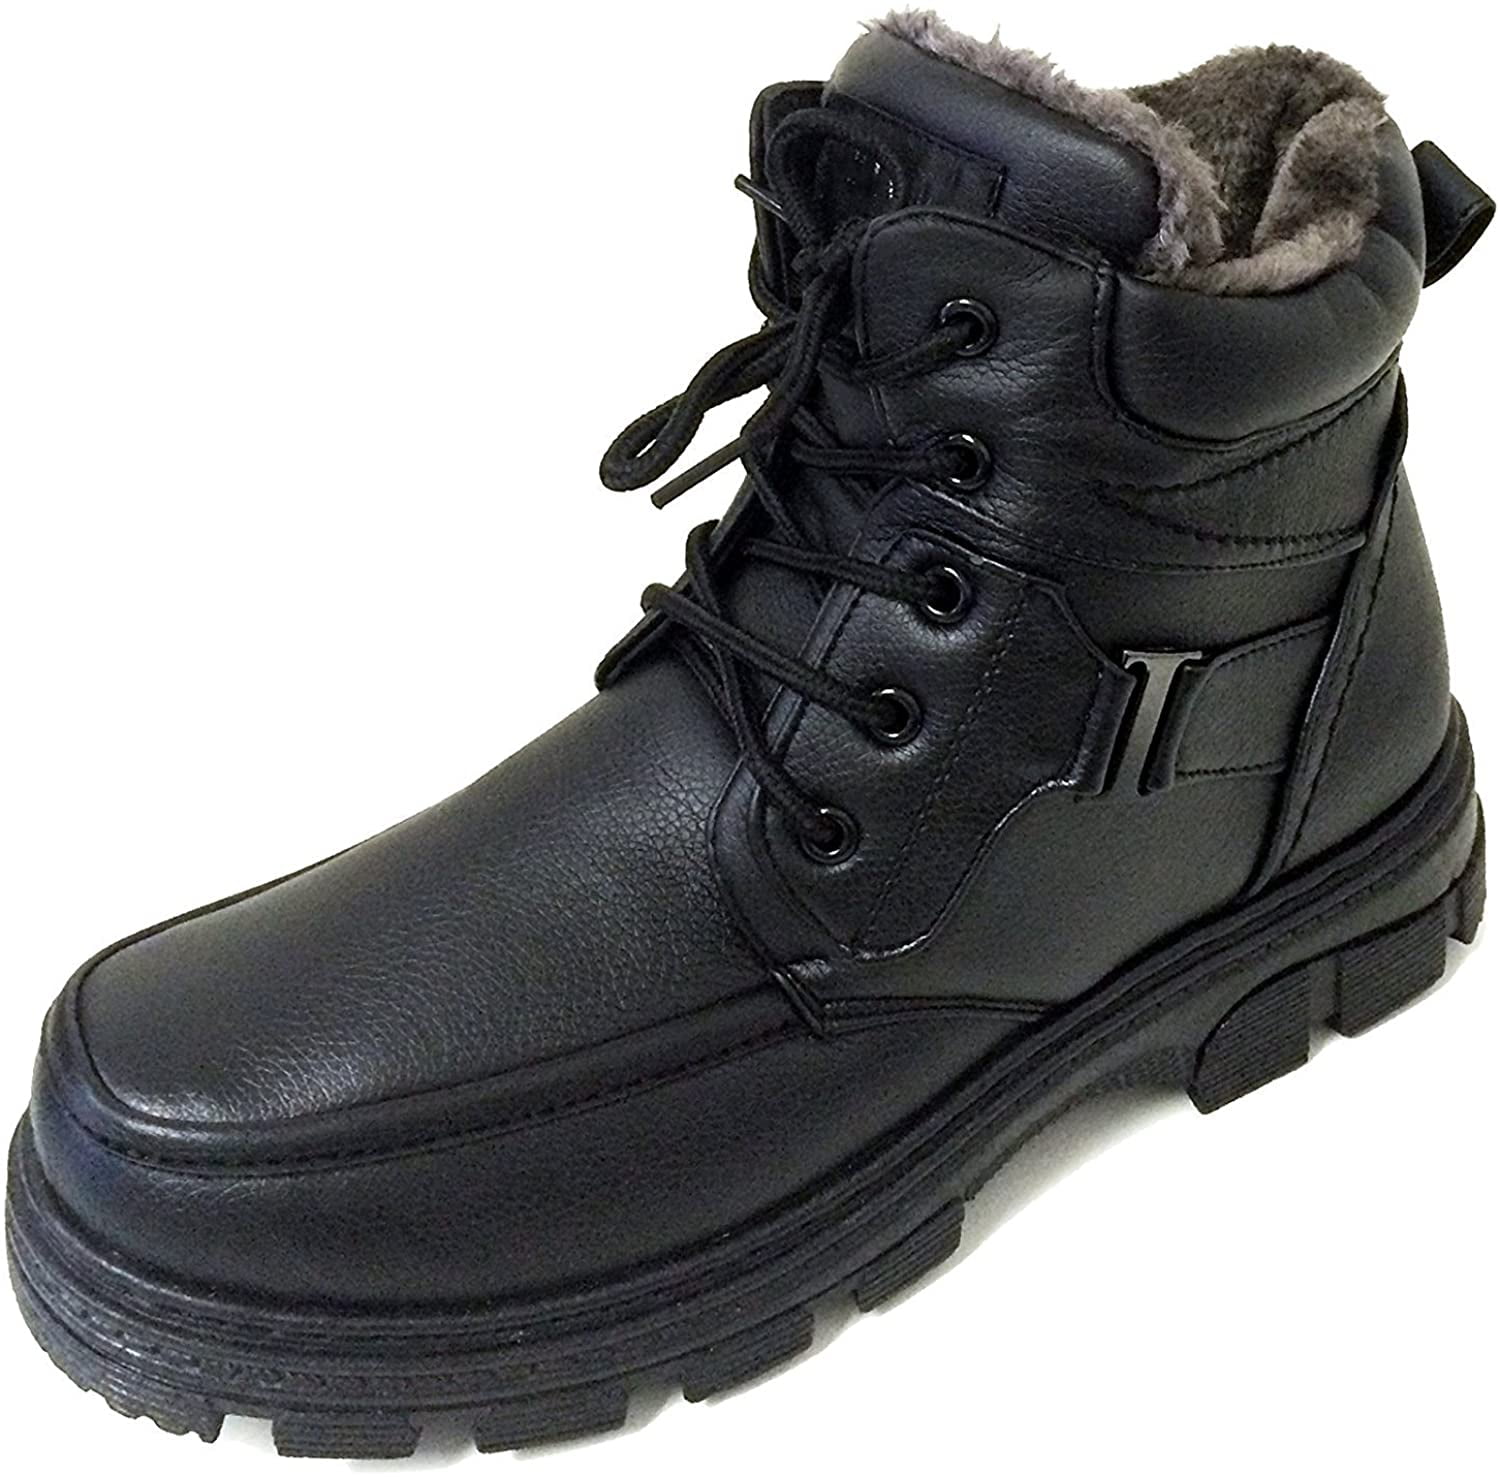 size 8m cherokee mens rubber sole with leather upper winter/rain lace up boots